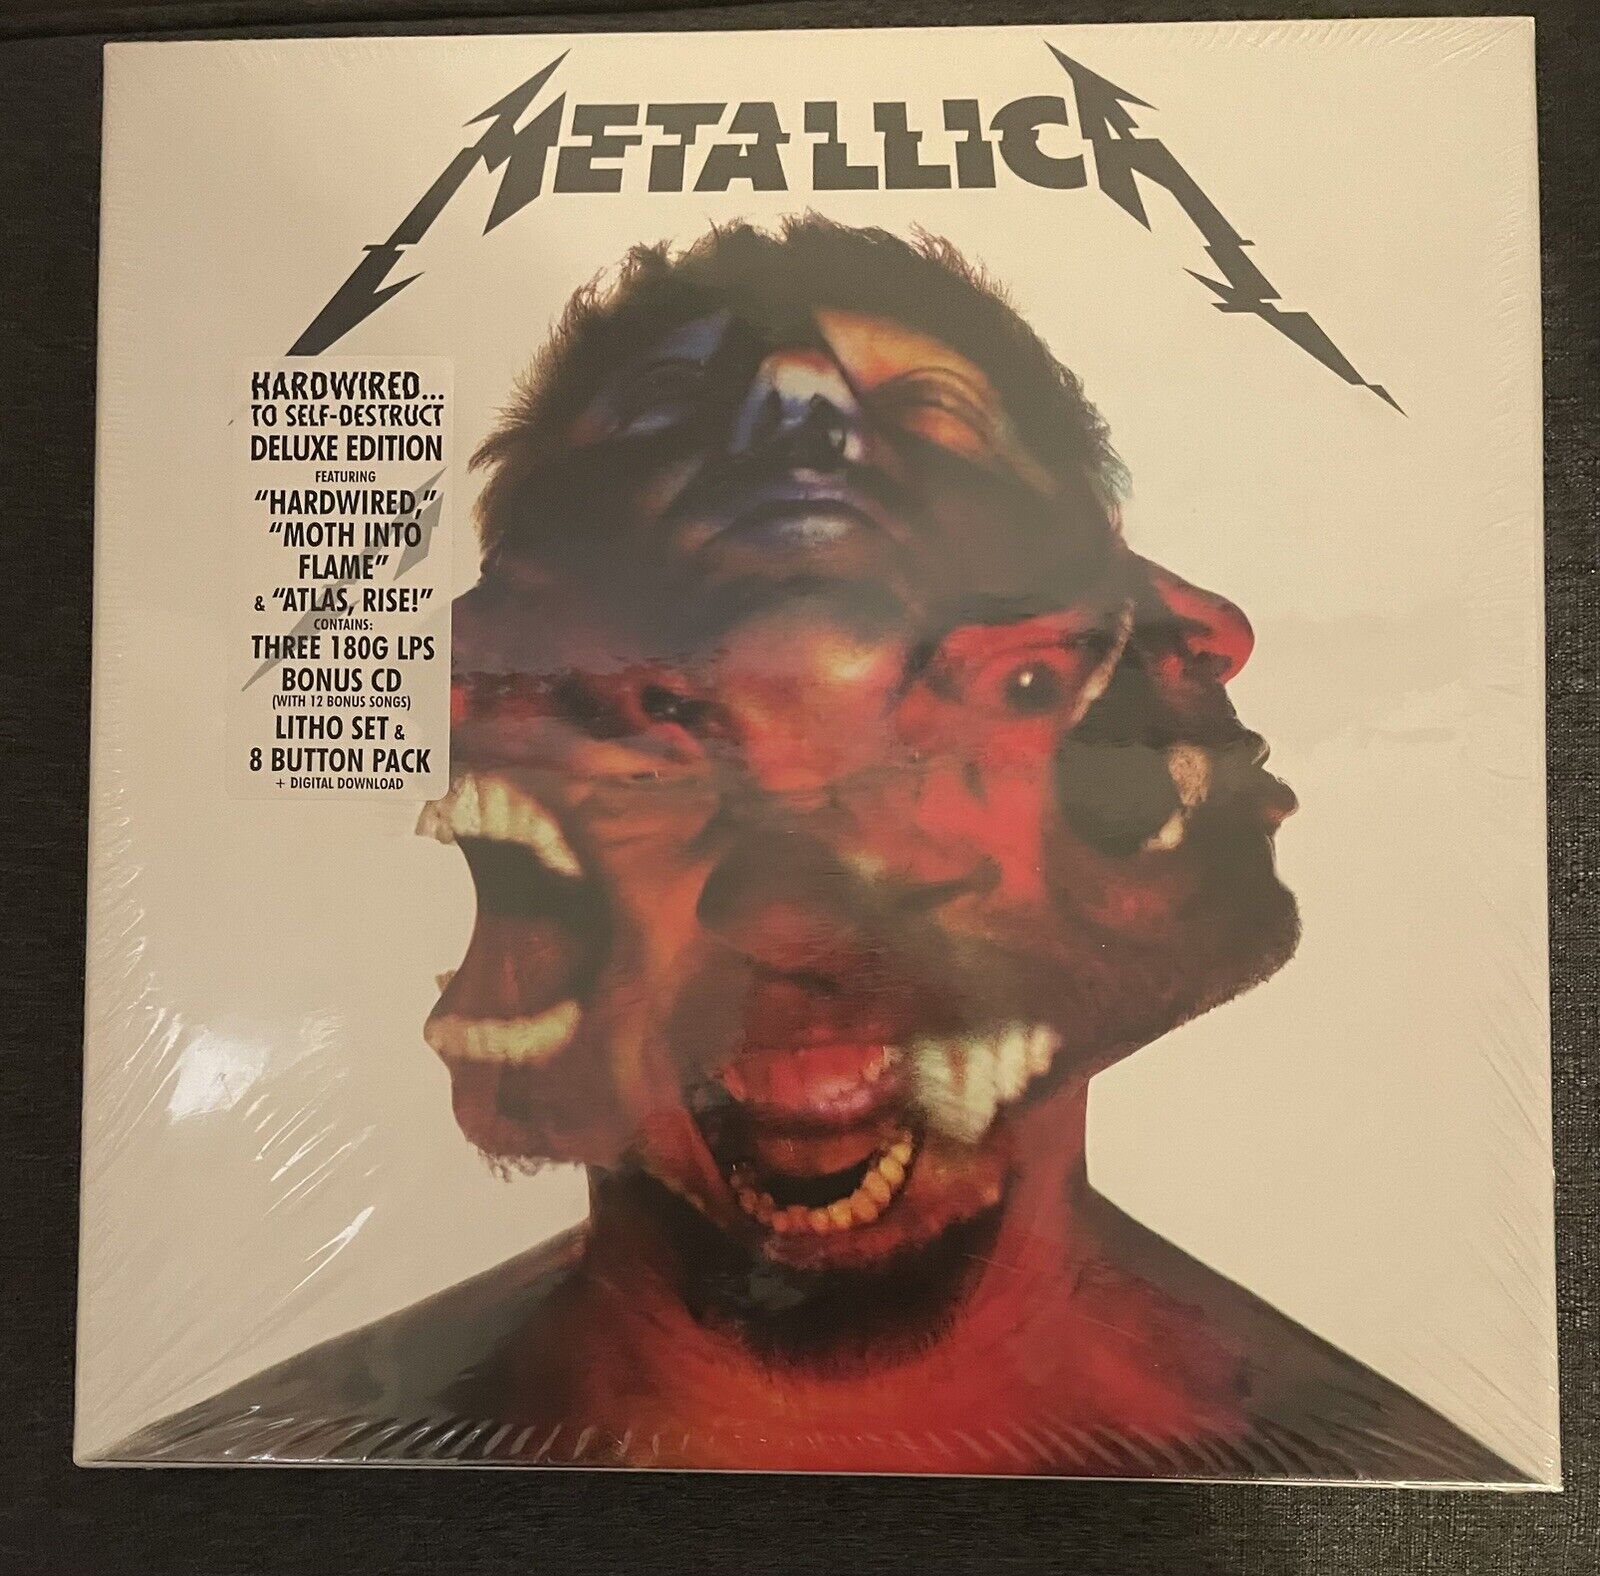 Hardwired... To Self-Destruct by Metallica (Record, 2016) DELUXE ED  NEW/SEALED